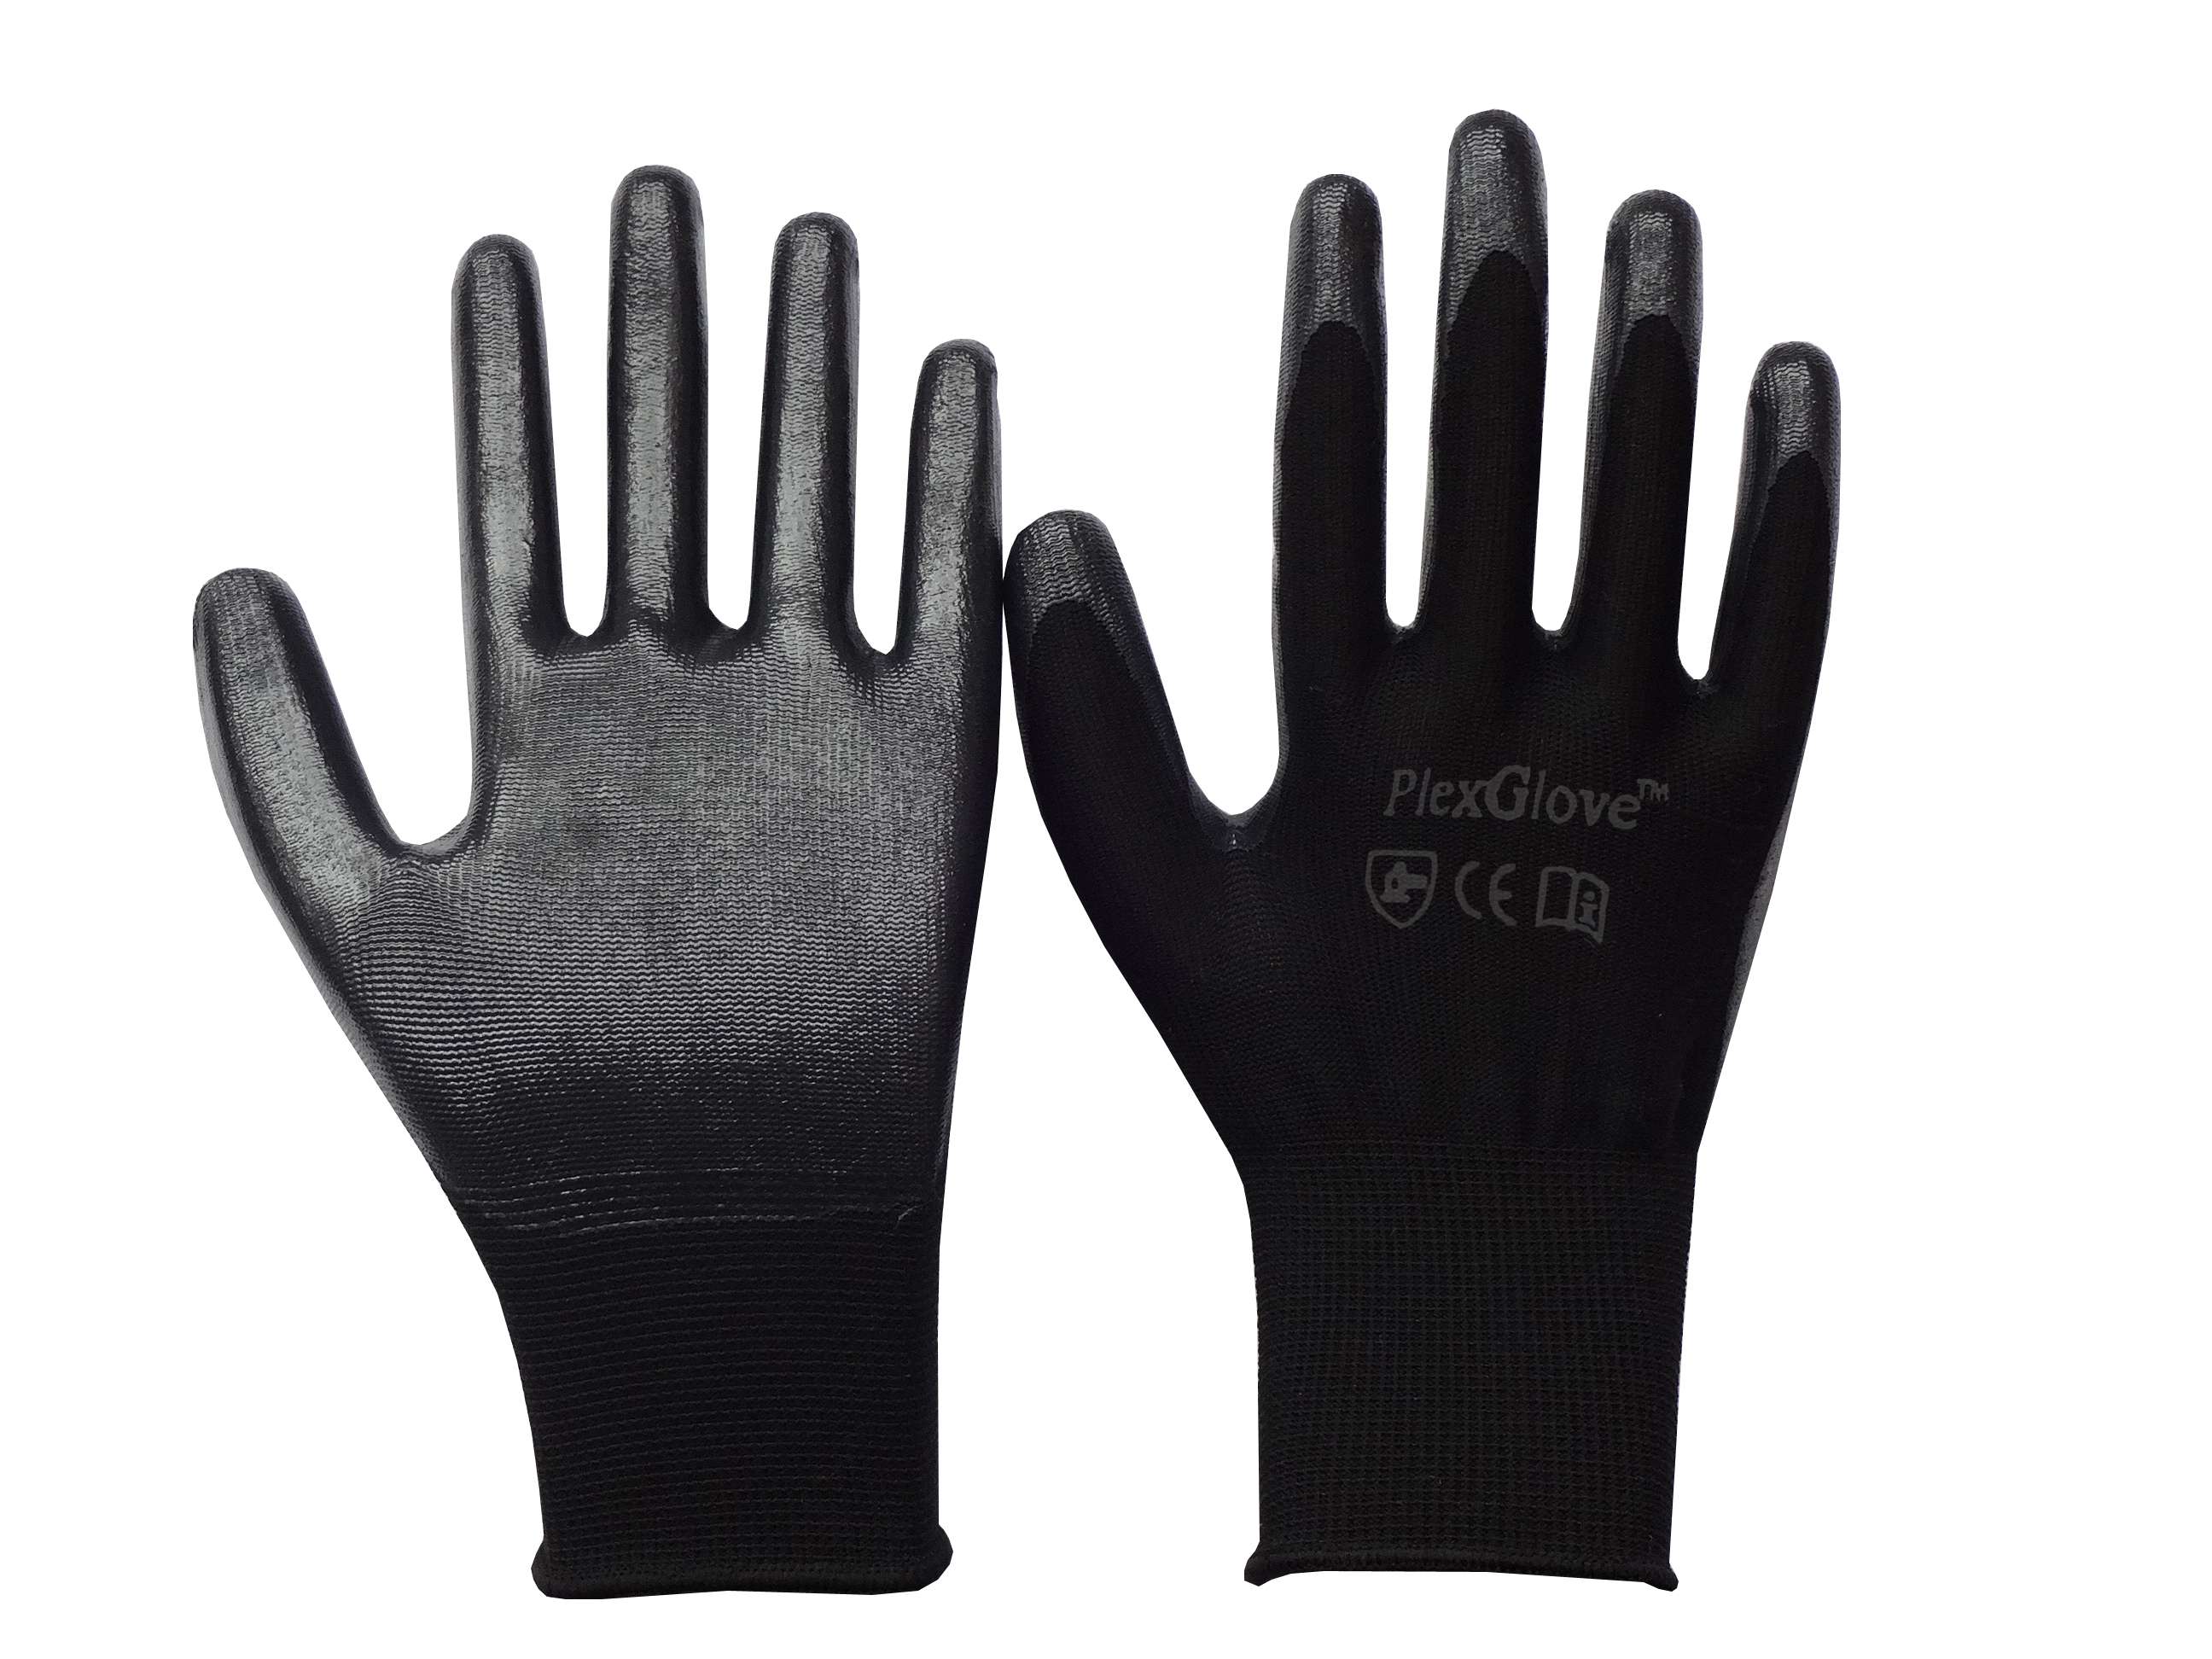 Large Black Nylon Seamless Knit Work Gloves with Black Nitrile Coated Palm, 144 Pairs/Case - 1